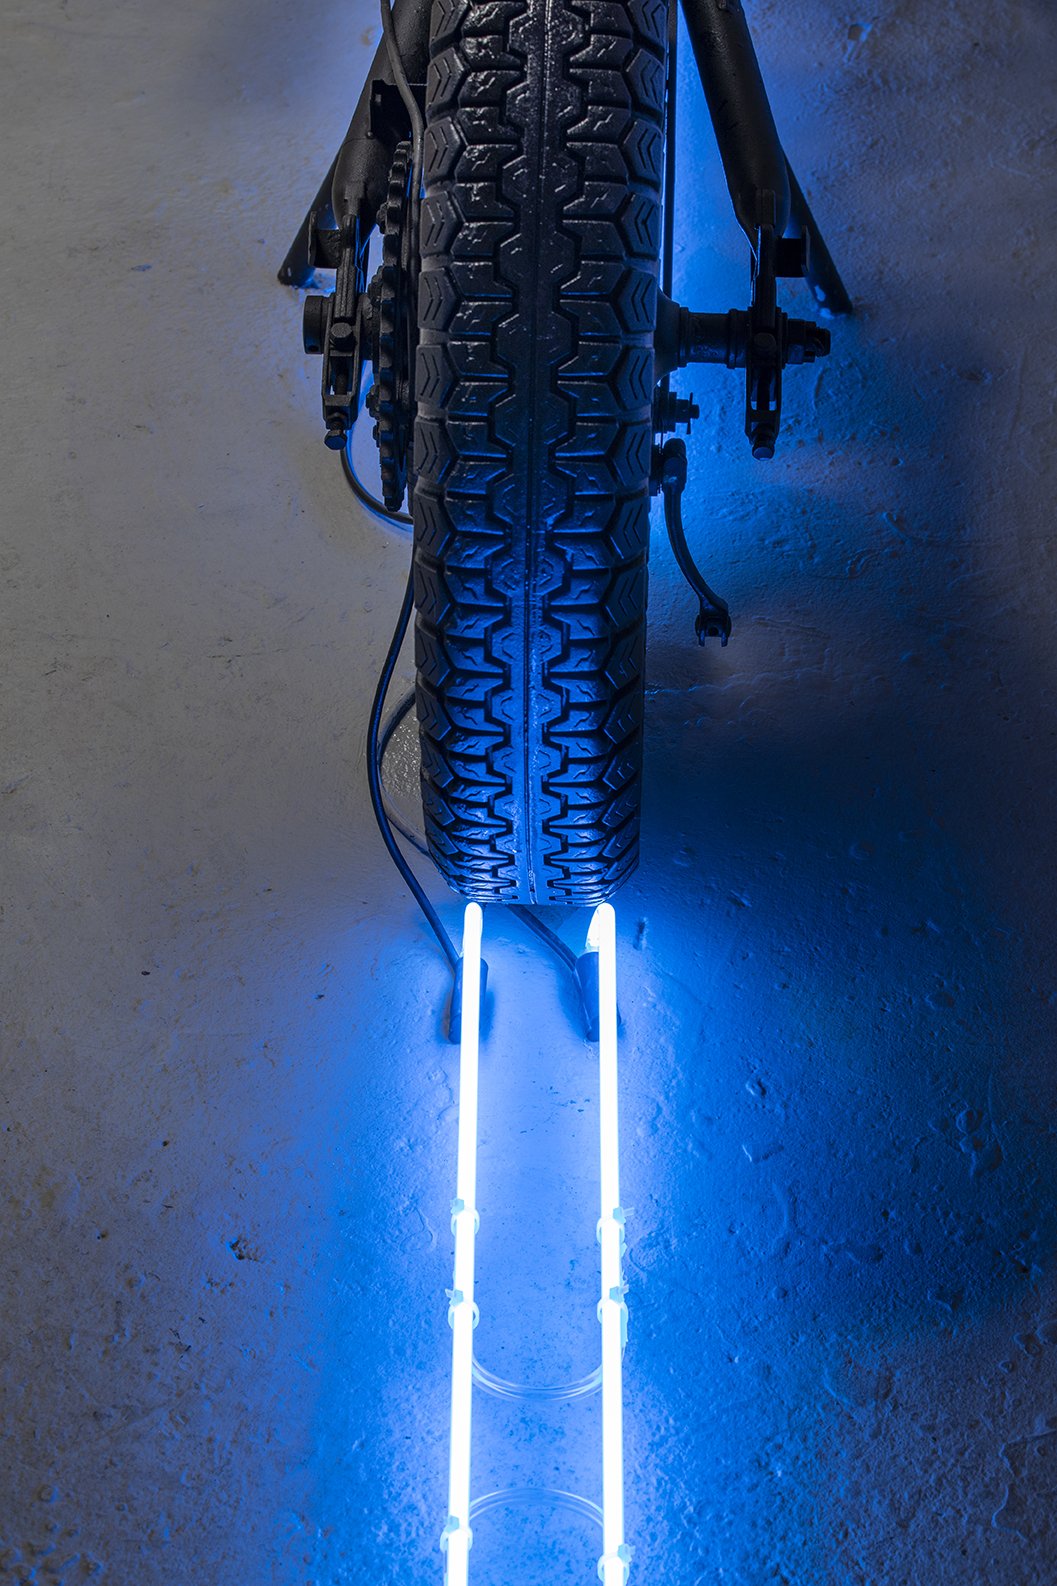  Marsha Pels,  Dead Cowboy  (detail), 2007-2008. Cast epoxy resin, cast rubber, deconstructed motorcycle, steel, neon lights, argon- mercury text on wall. 48 x 120.5 x 36 inches. 